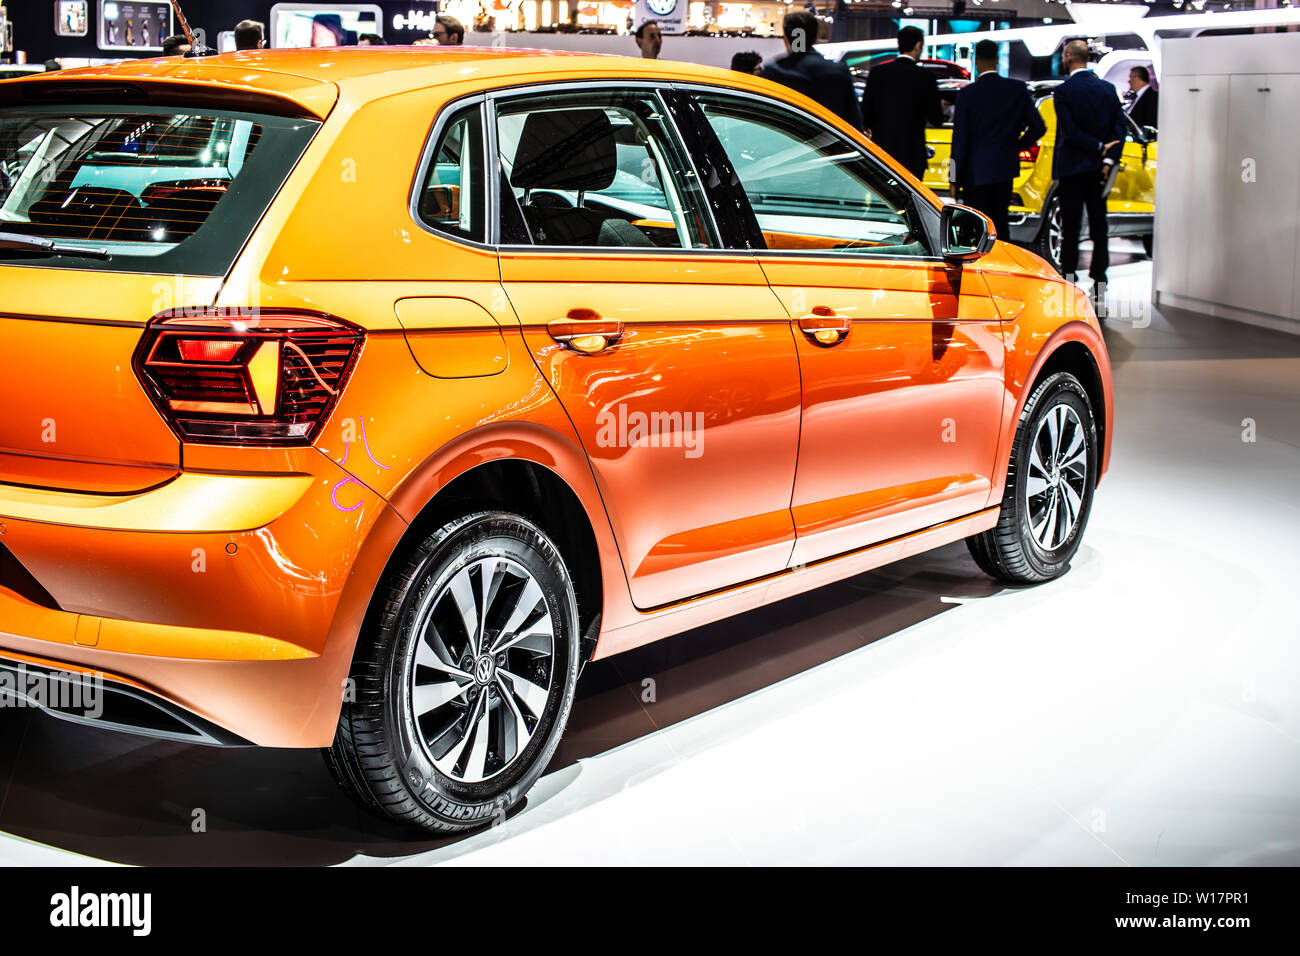 Vw Polo High Resolution Stock Photography and Images - Alamy